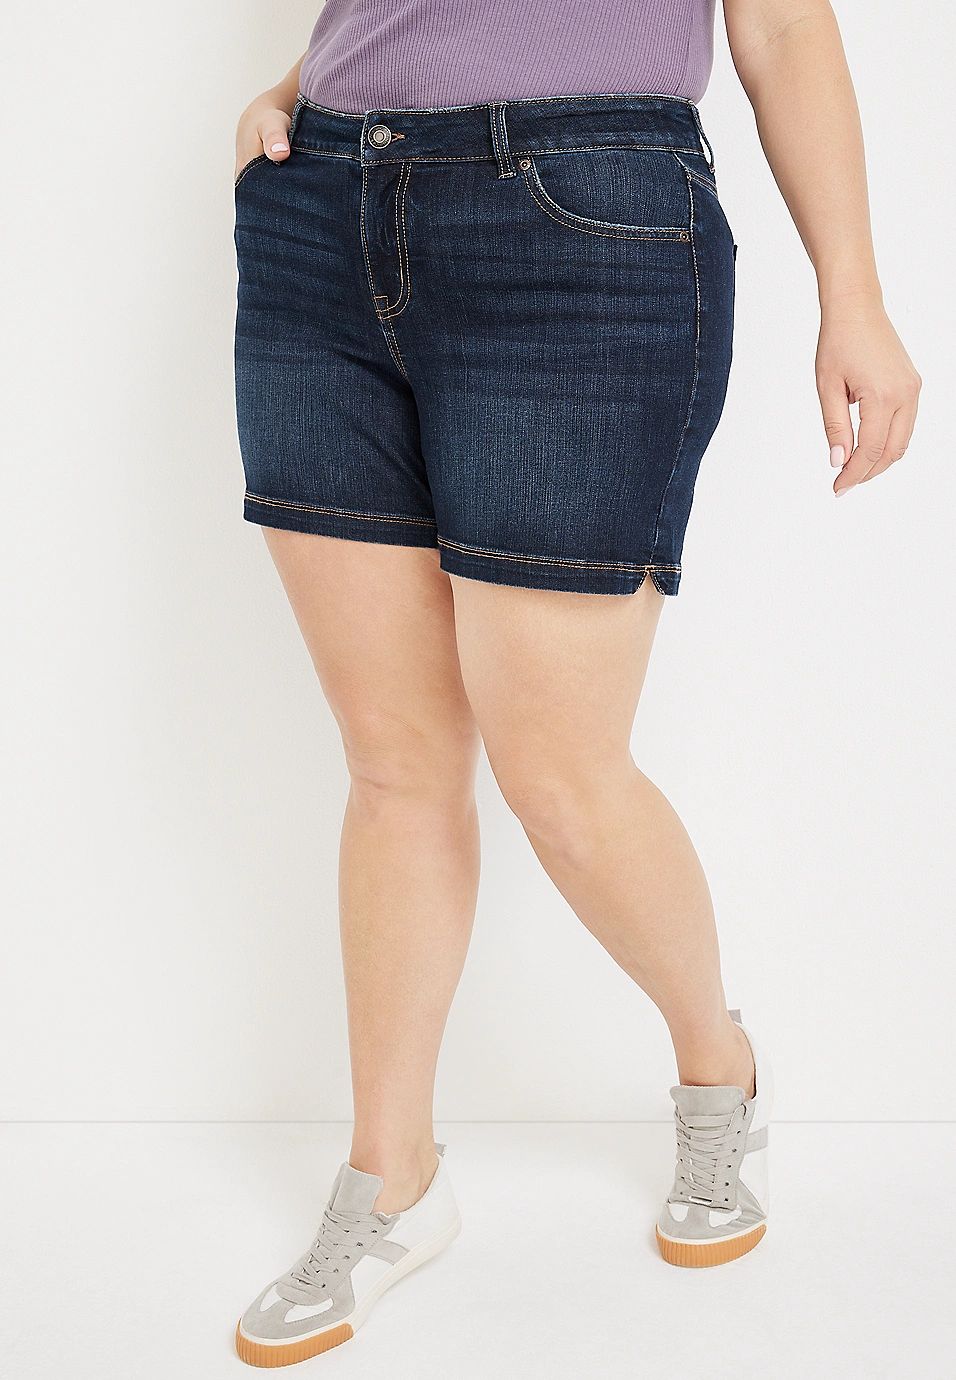 Plus Size m jeans by maurices™ Classic Mid Rise 6in Short | Maurices